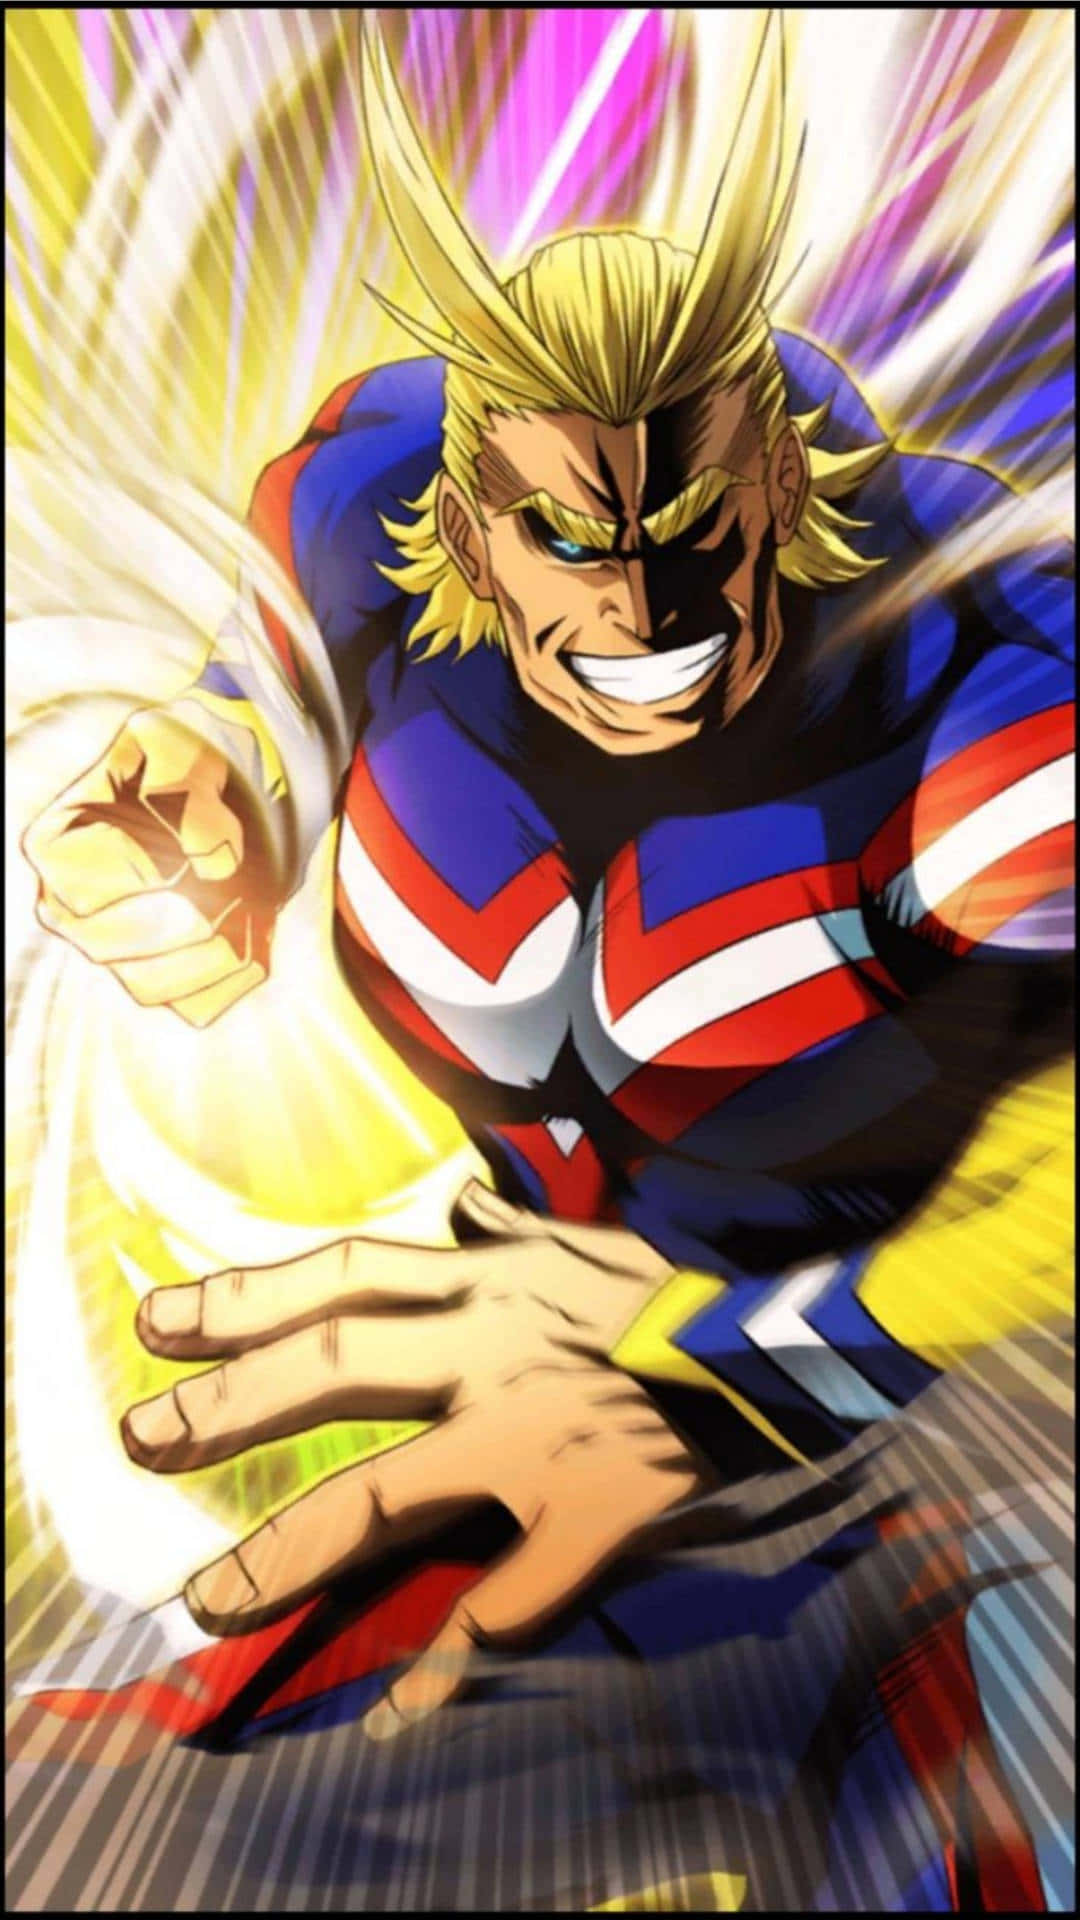 "I am here to protect you! All Might unleashes his Quirk with a mighty roar"